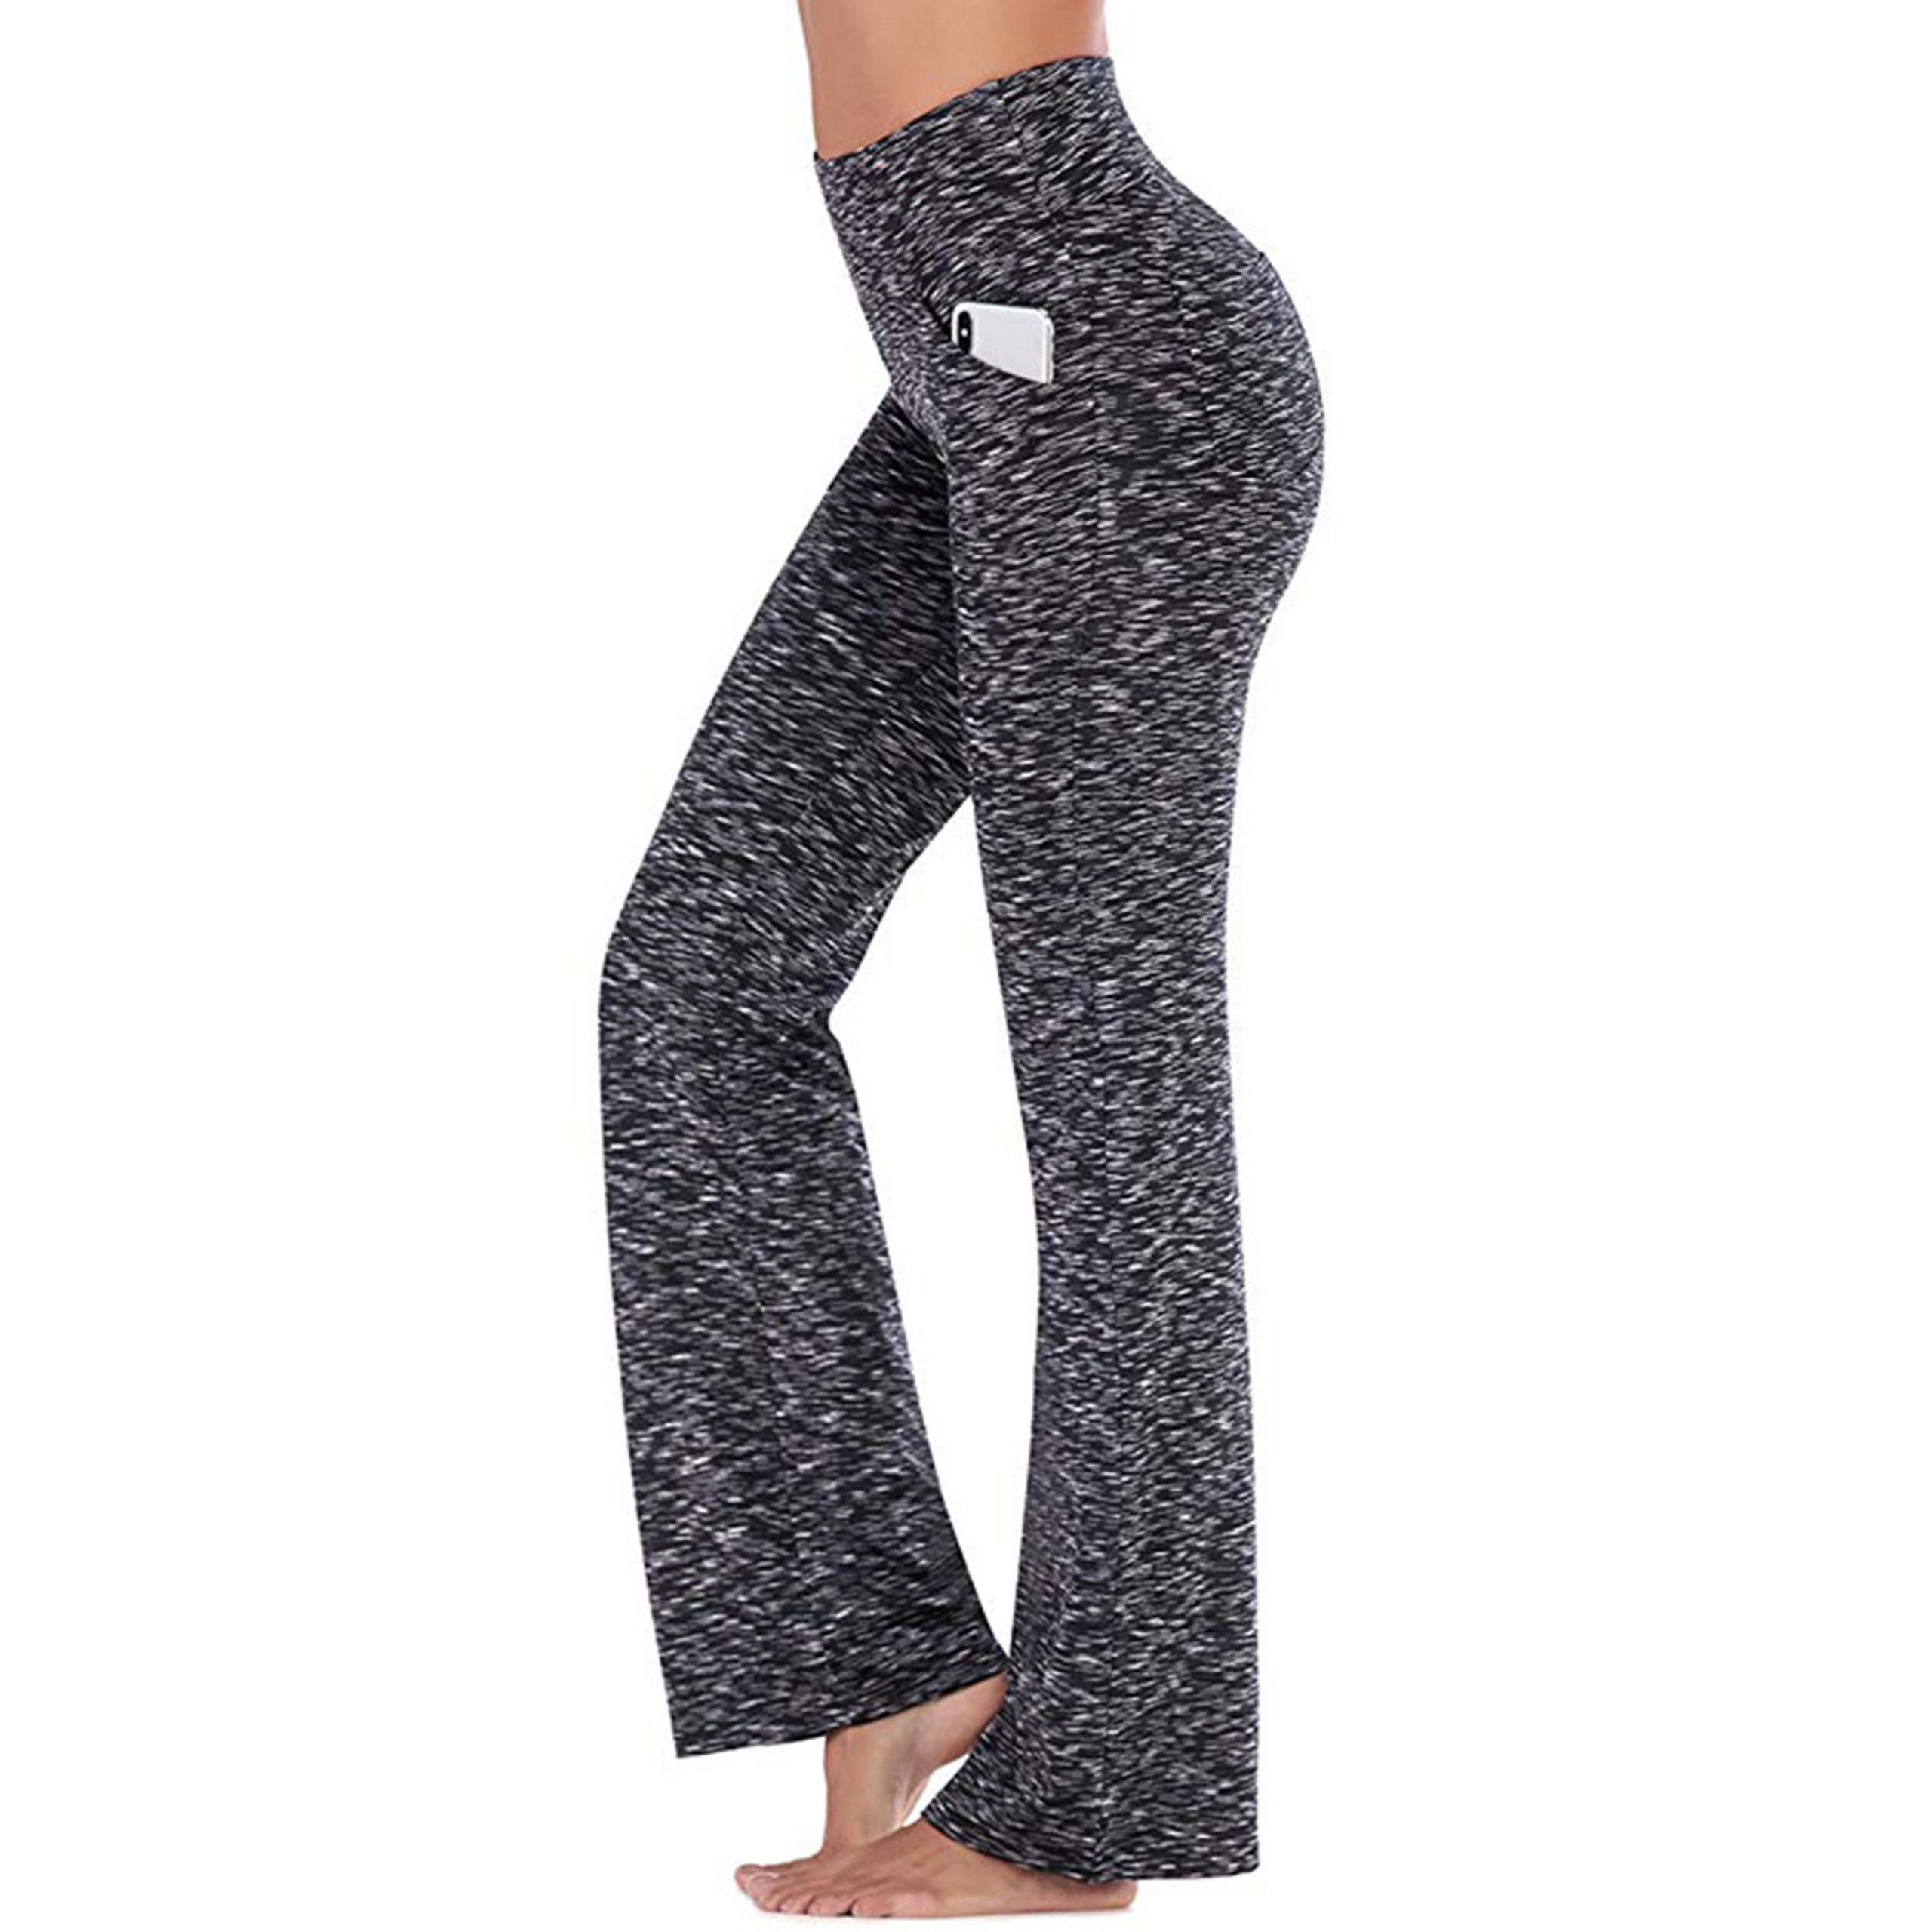 IUGA Bootcut Yoga Pants with Pockets for Women High Waist Black -Small